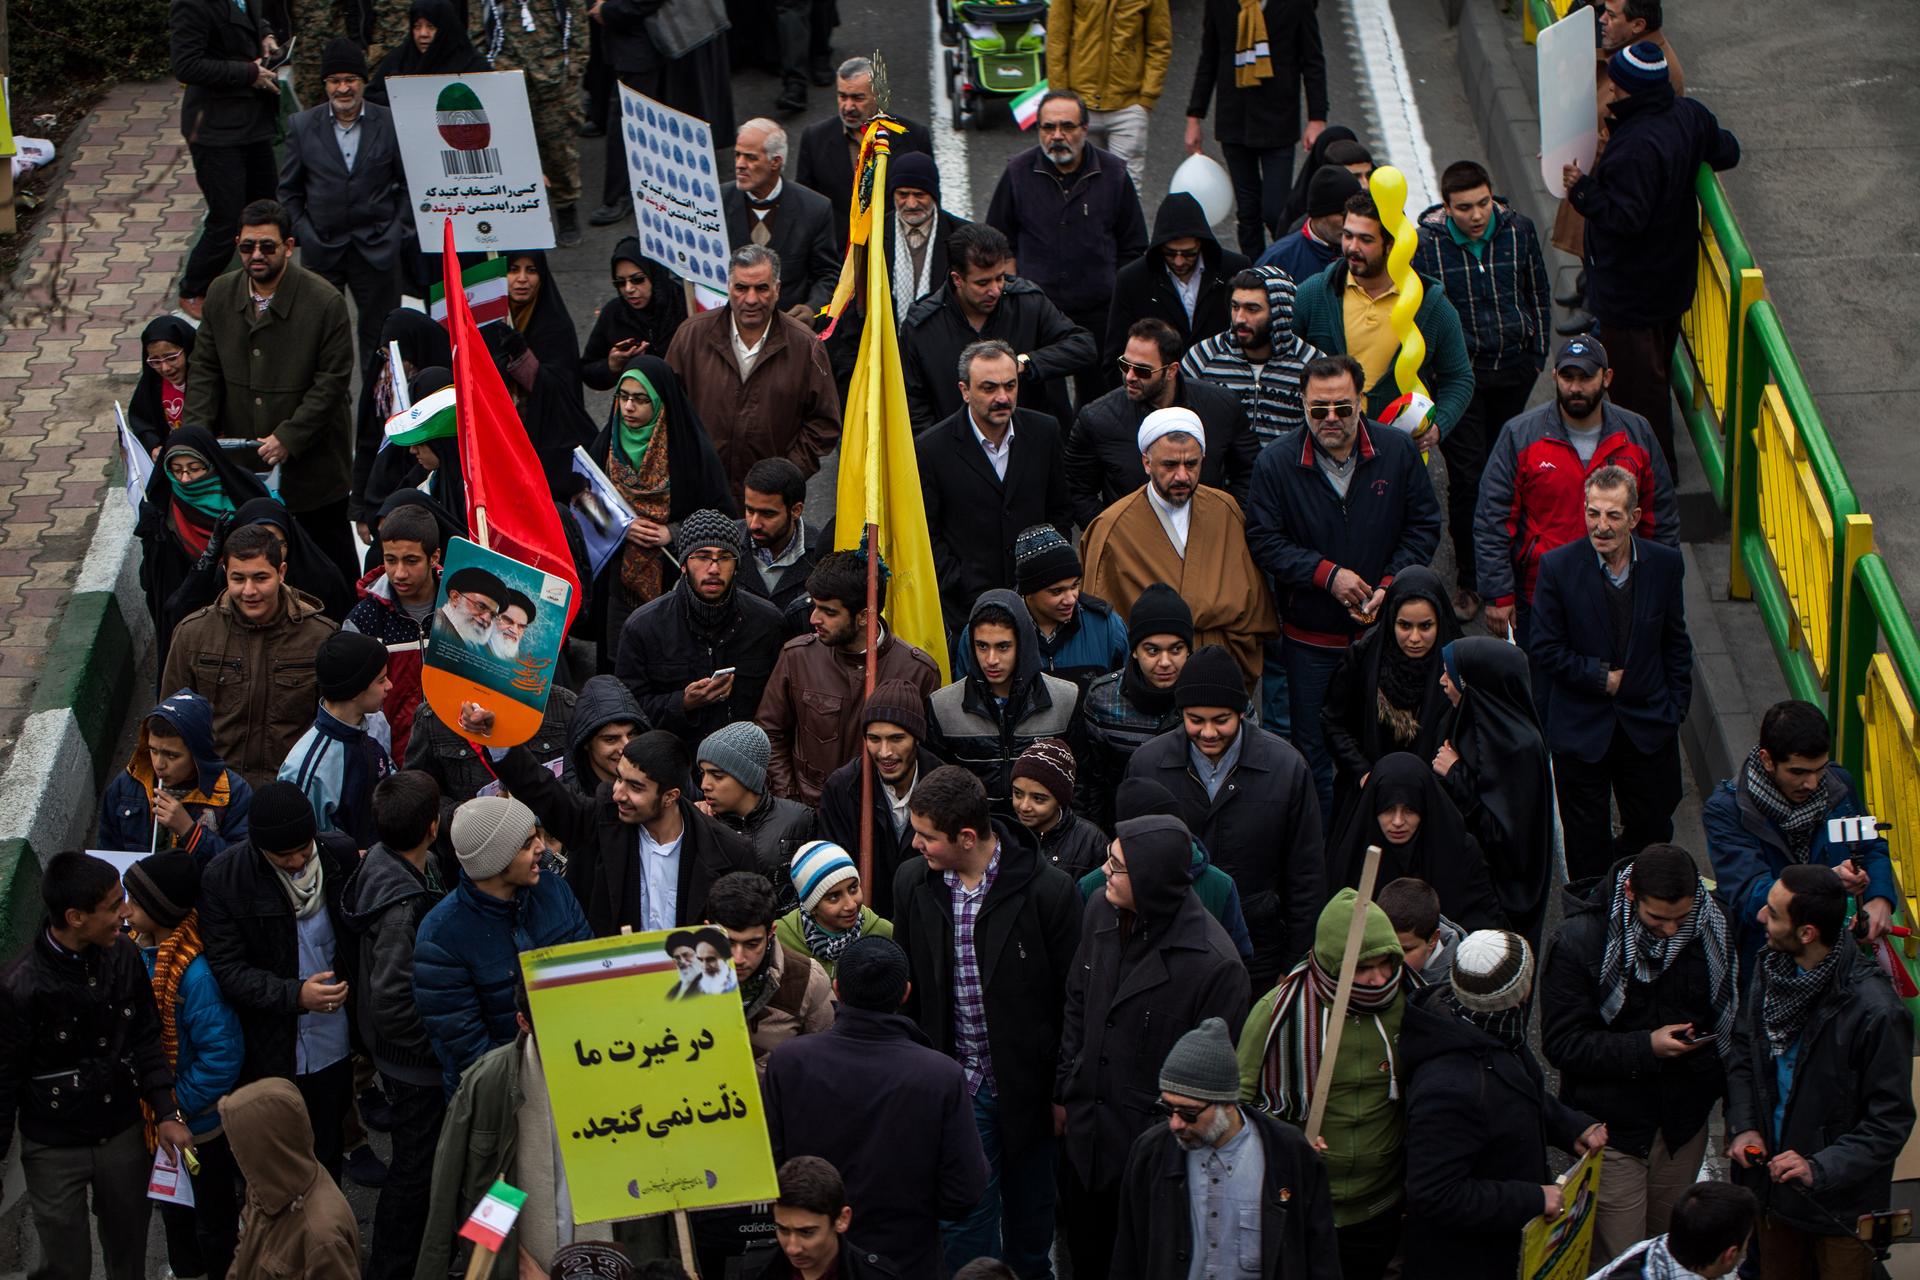 Iranians attend rally in Tehran.